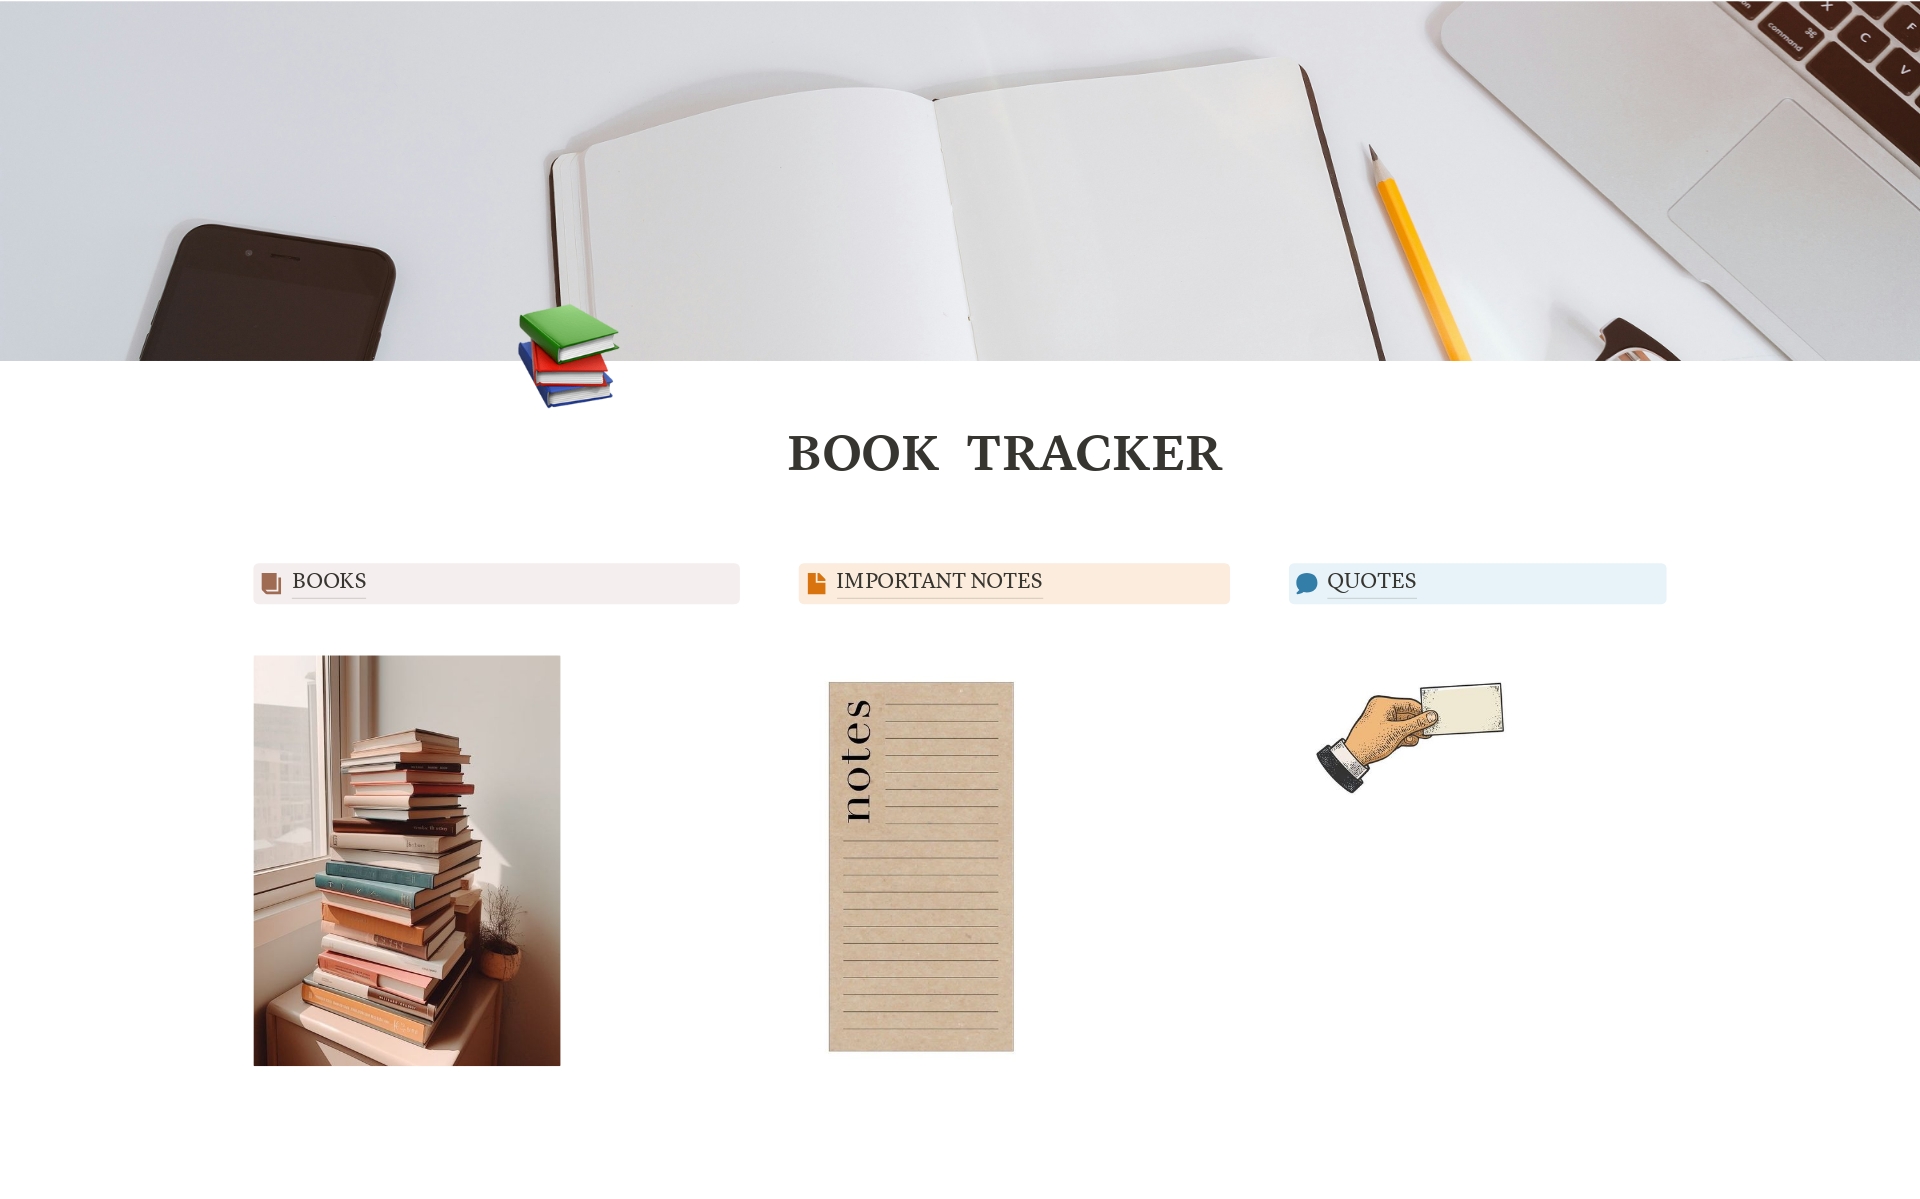 This aesthetic Book Tracking Template offers a catalog system to organize your books by time and date, note-taking sections to capture important insights, book-progress tracking tools, and a sleek design to greatly enhance your book reading experience.